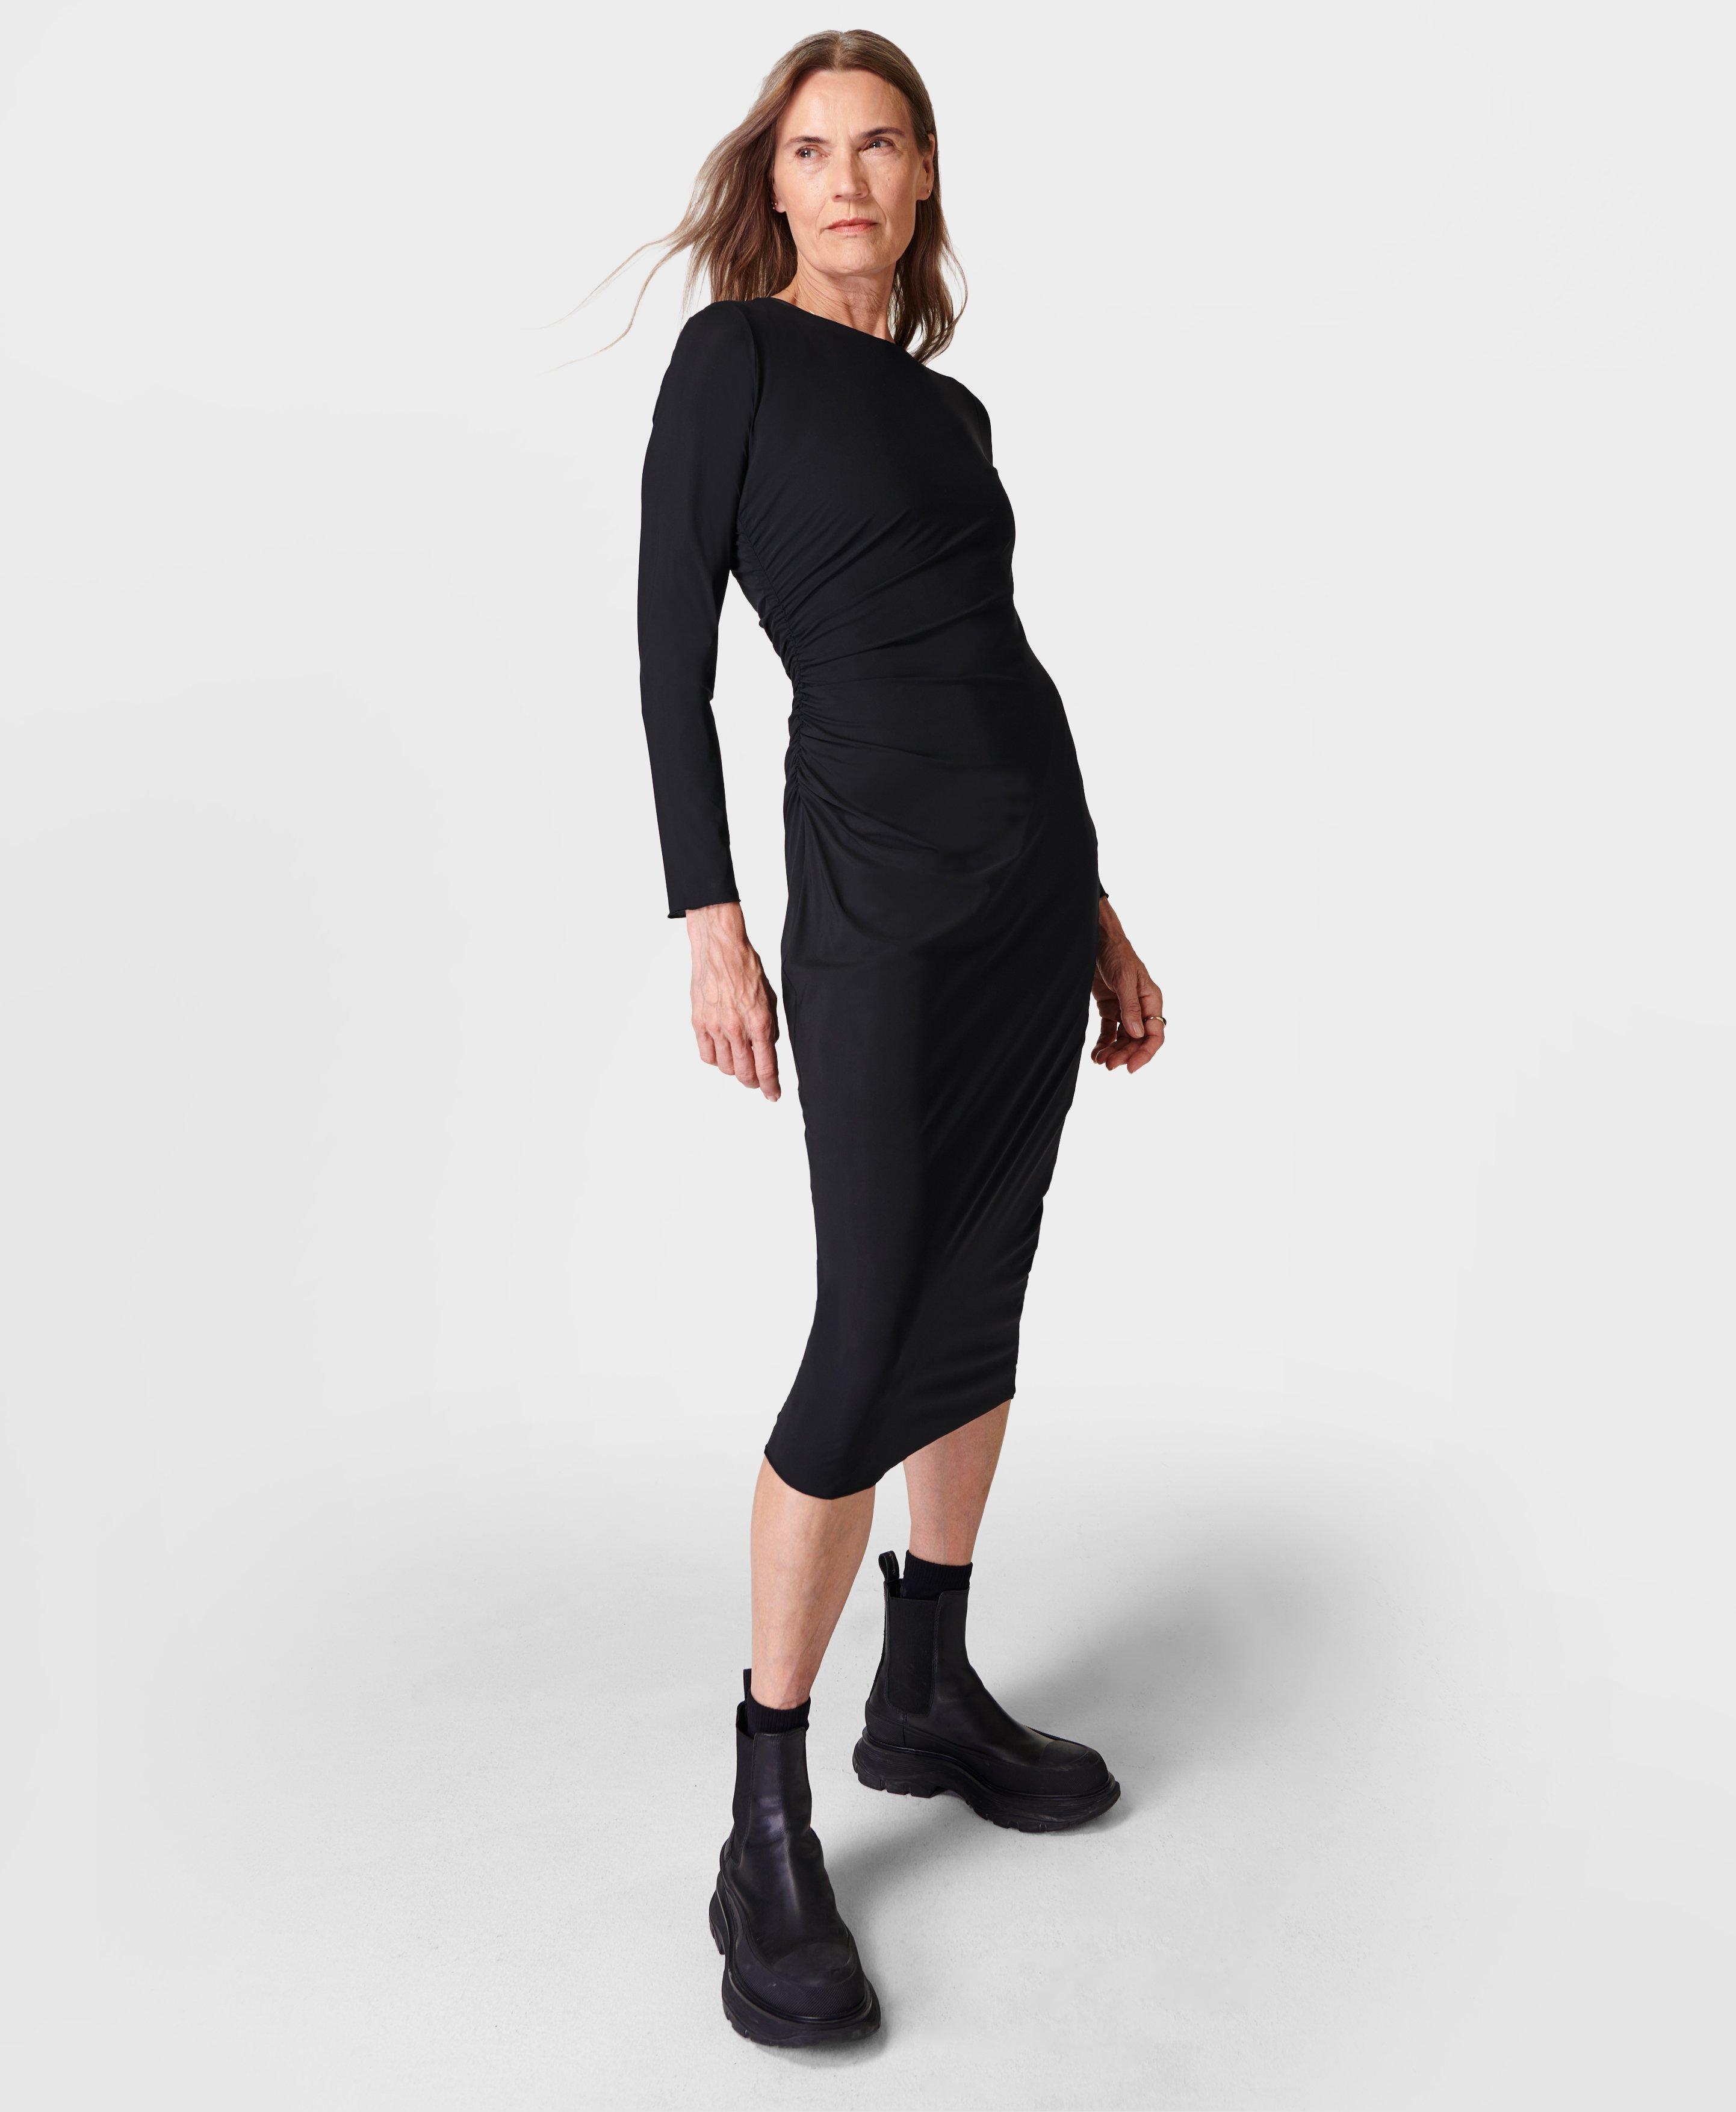 Sweaty Betty Sale - Shop up to 70% off